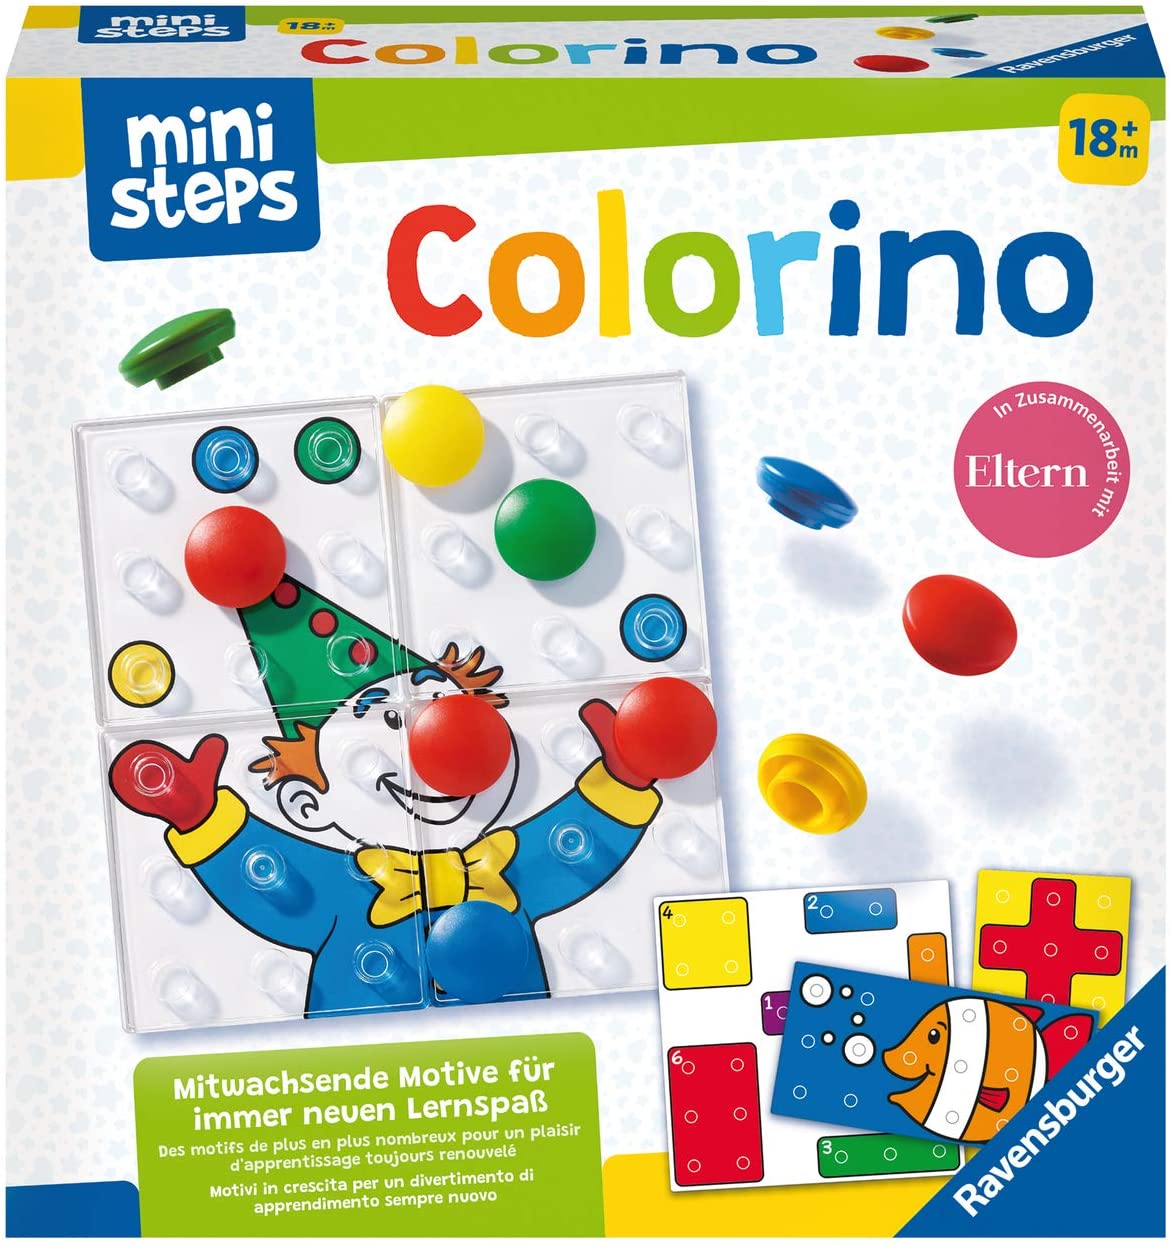 Ravensburger Ministeps 4165 Colorino Educational Game For Toddlers From 18 